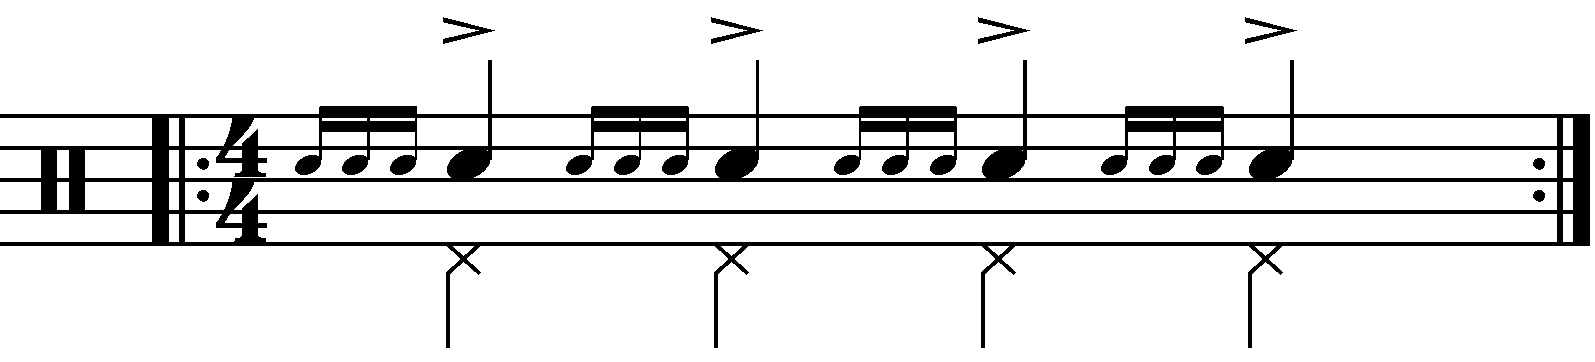 A Four Stroke Ruff with quarter note feet